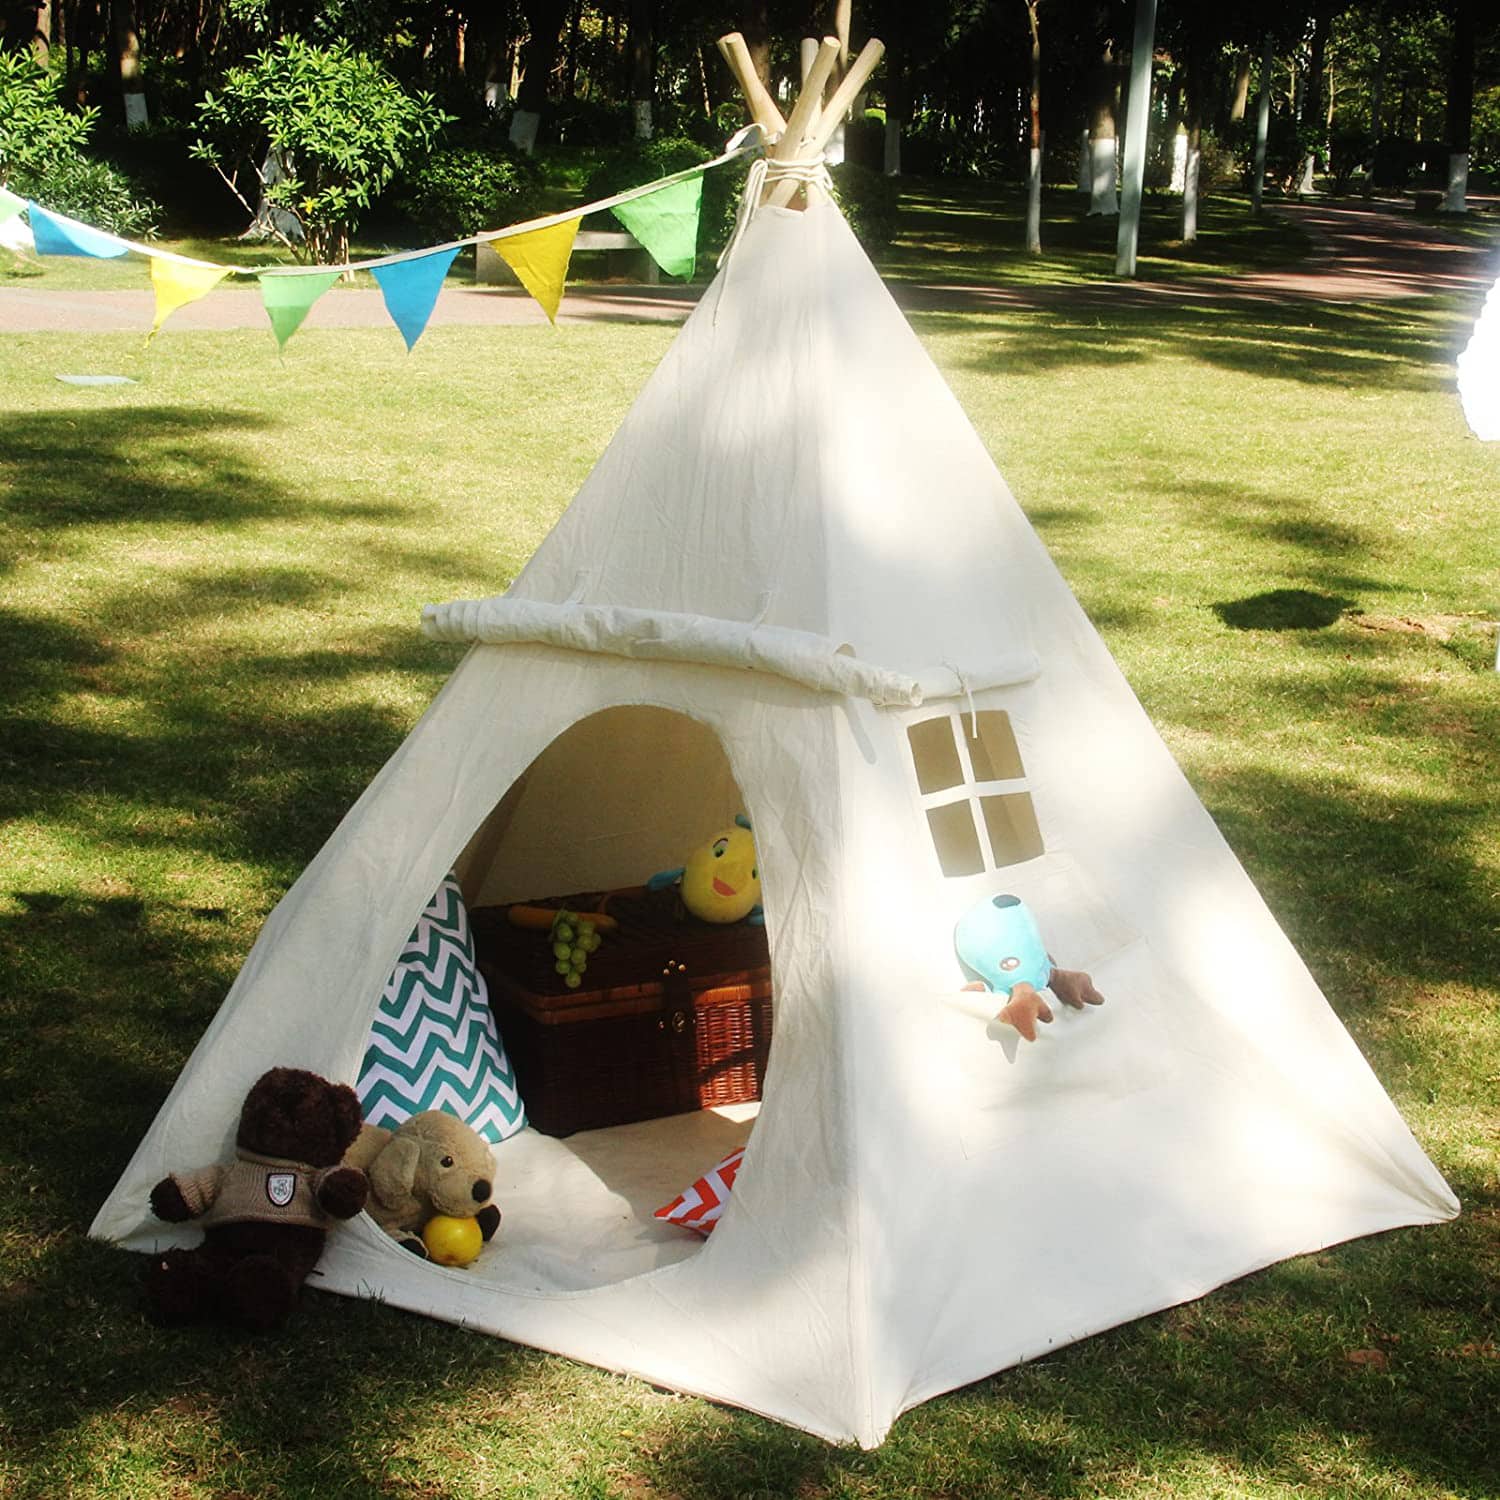 Top 10 Best Teepee Tents for Kids in 2023 Reviews | Buyer's Guide